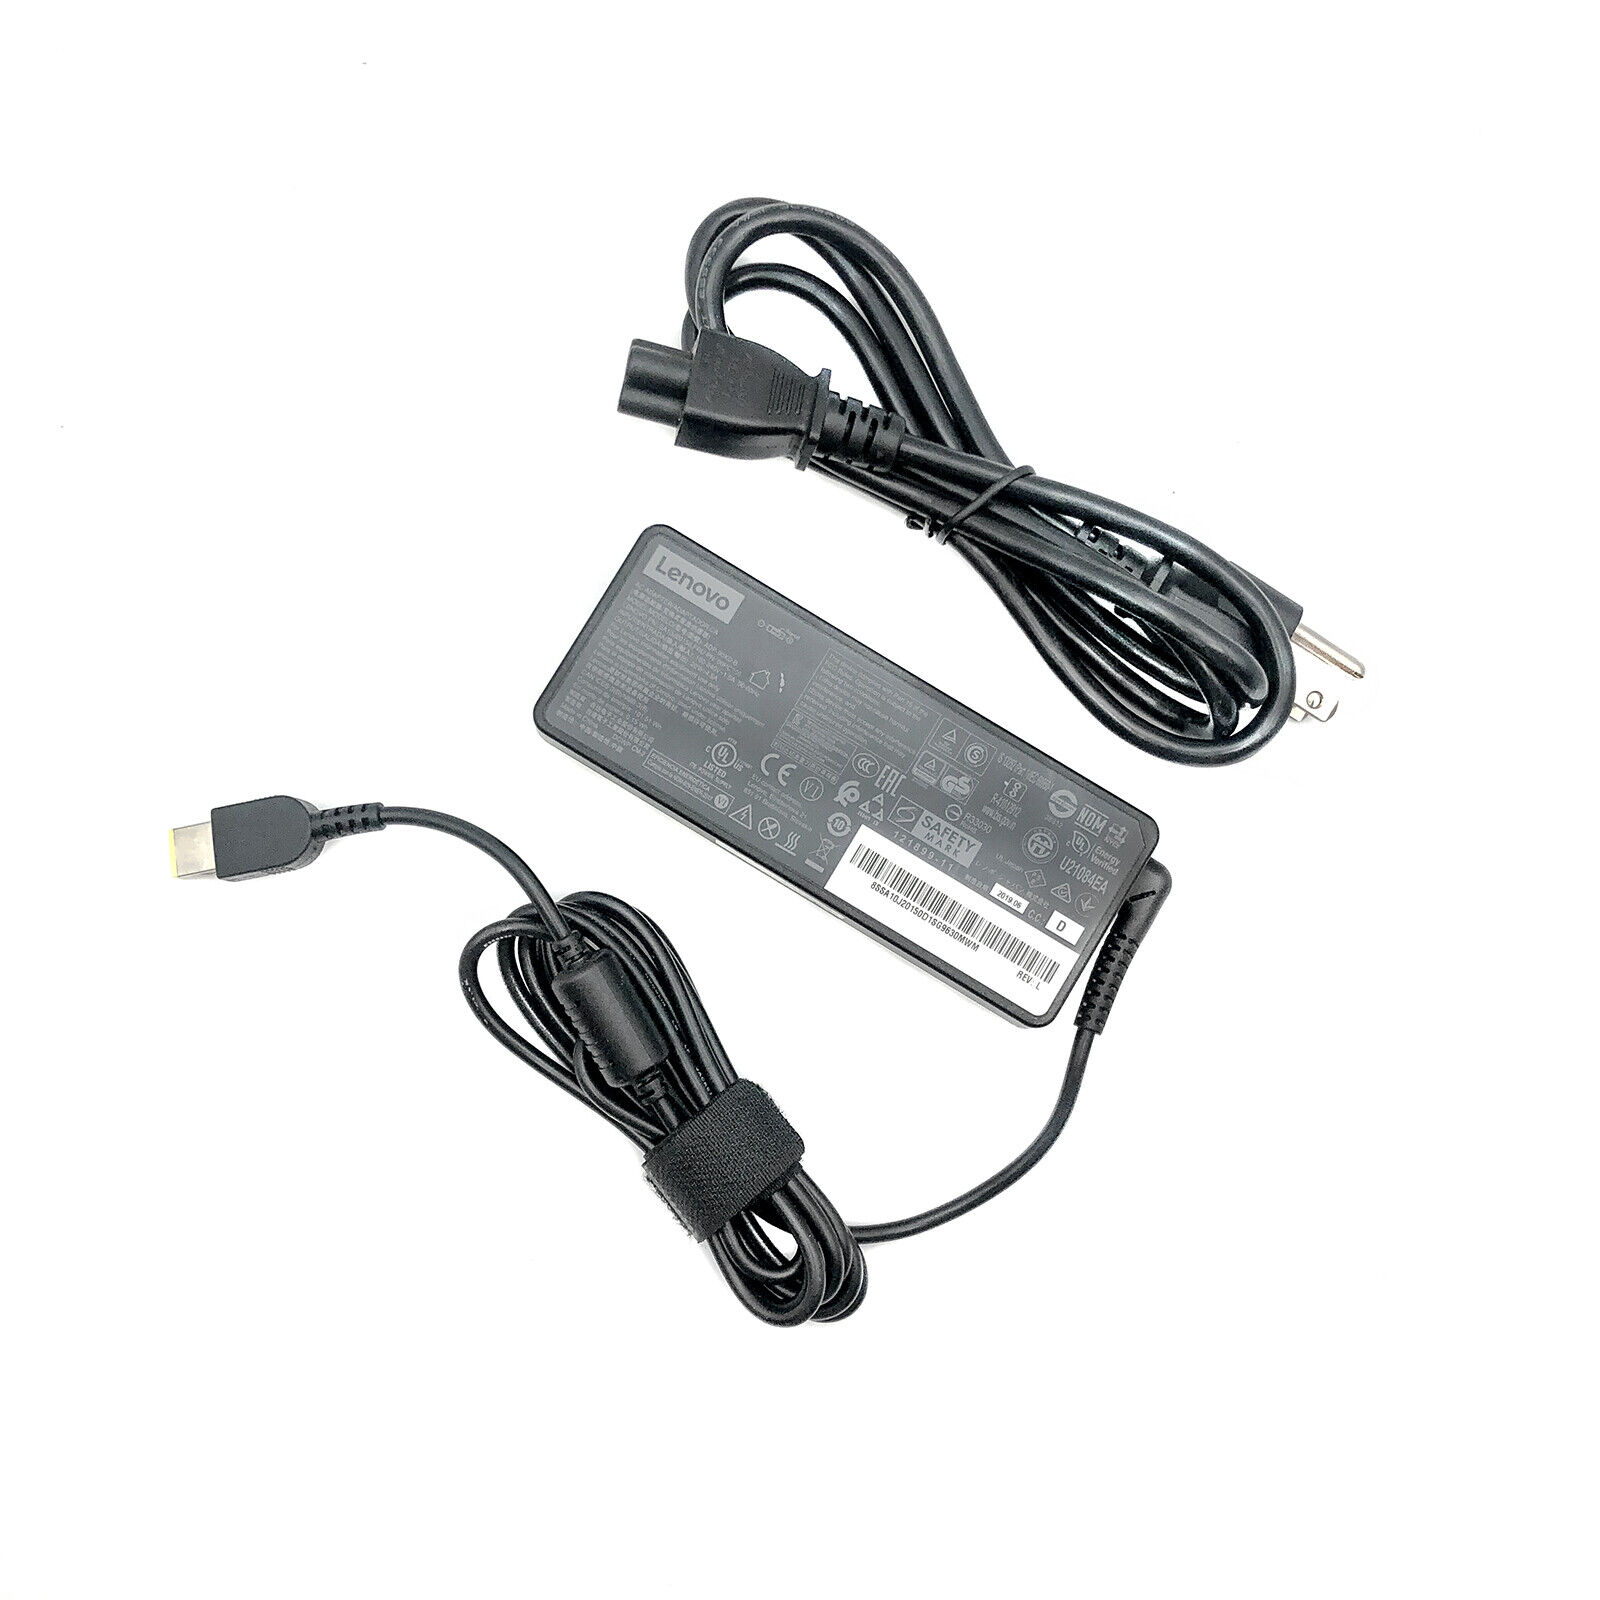 Genuine Lenovo AC Power Adapter 90W for Tiny-in-One 24 TIO24D LCD Monitor w/PC